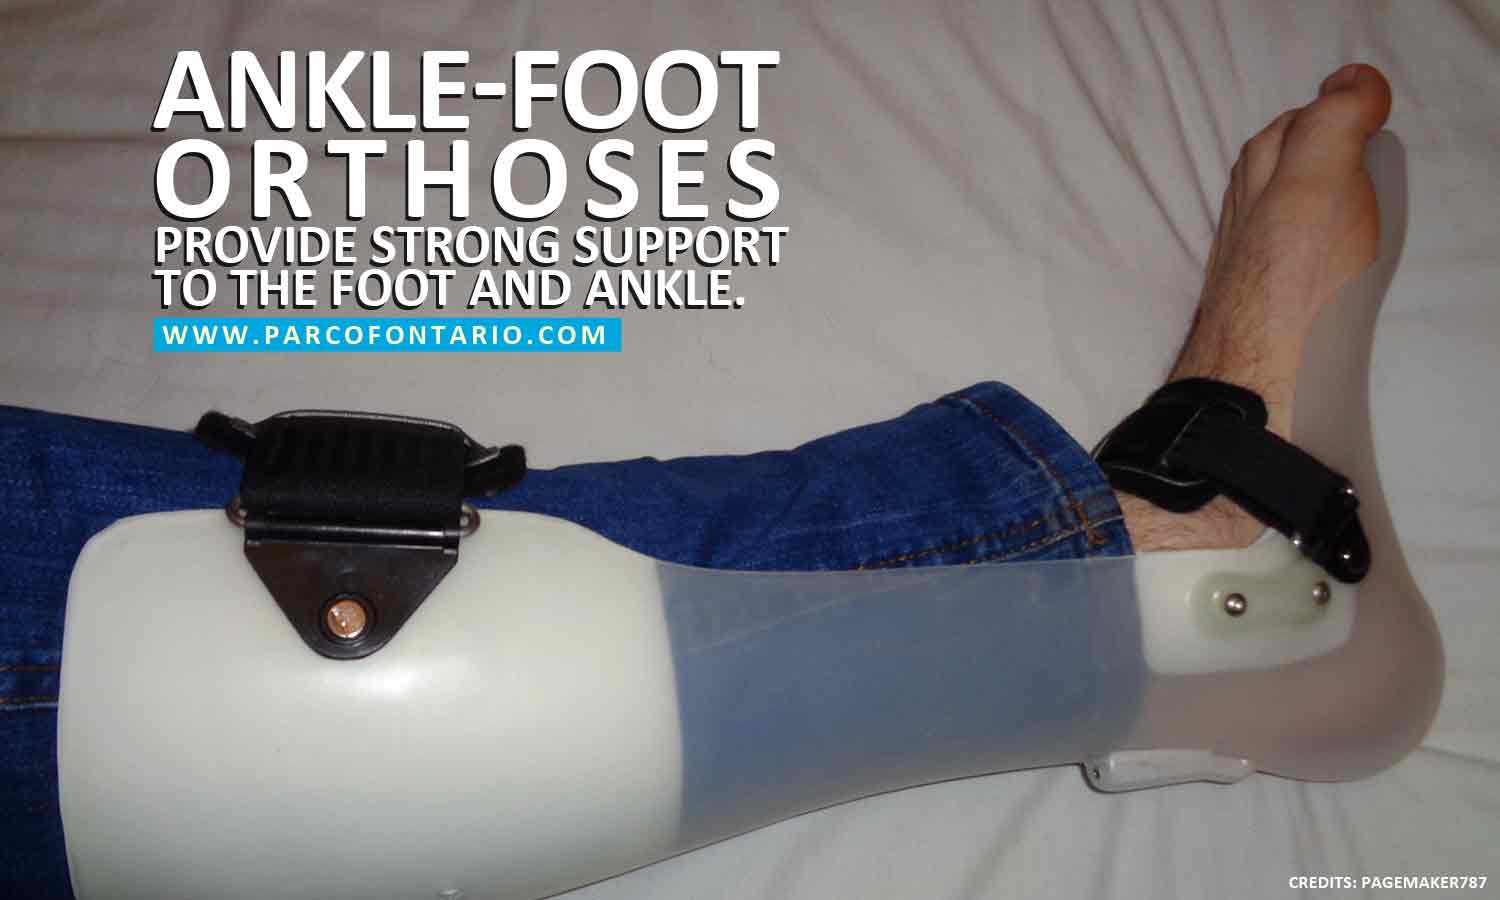 Ankle-foot orthoses